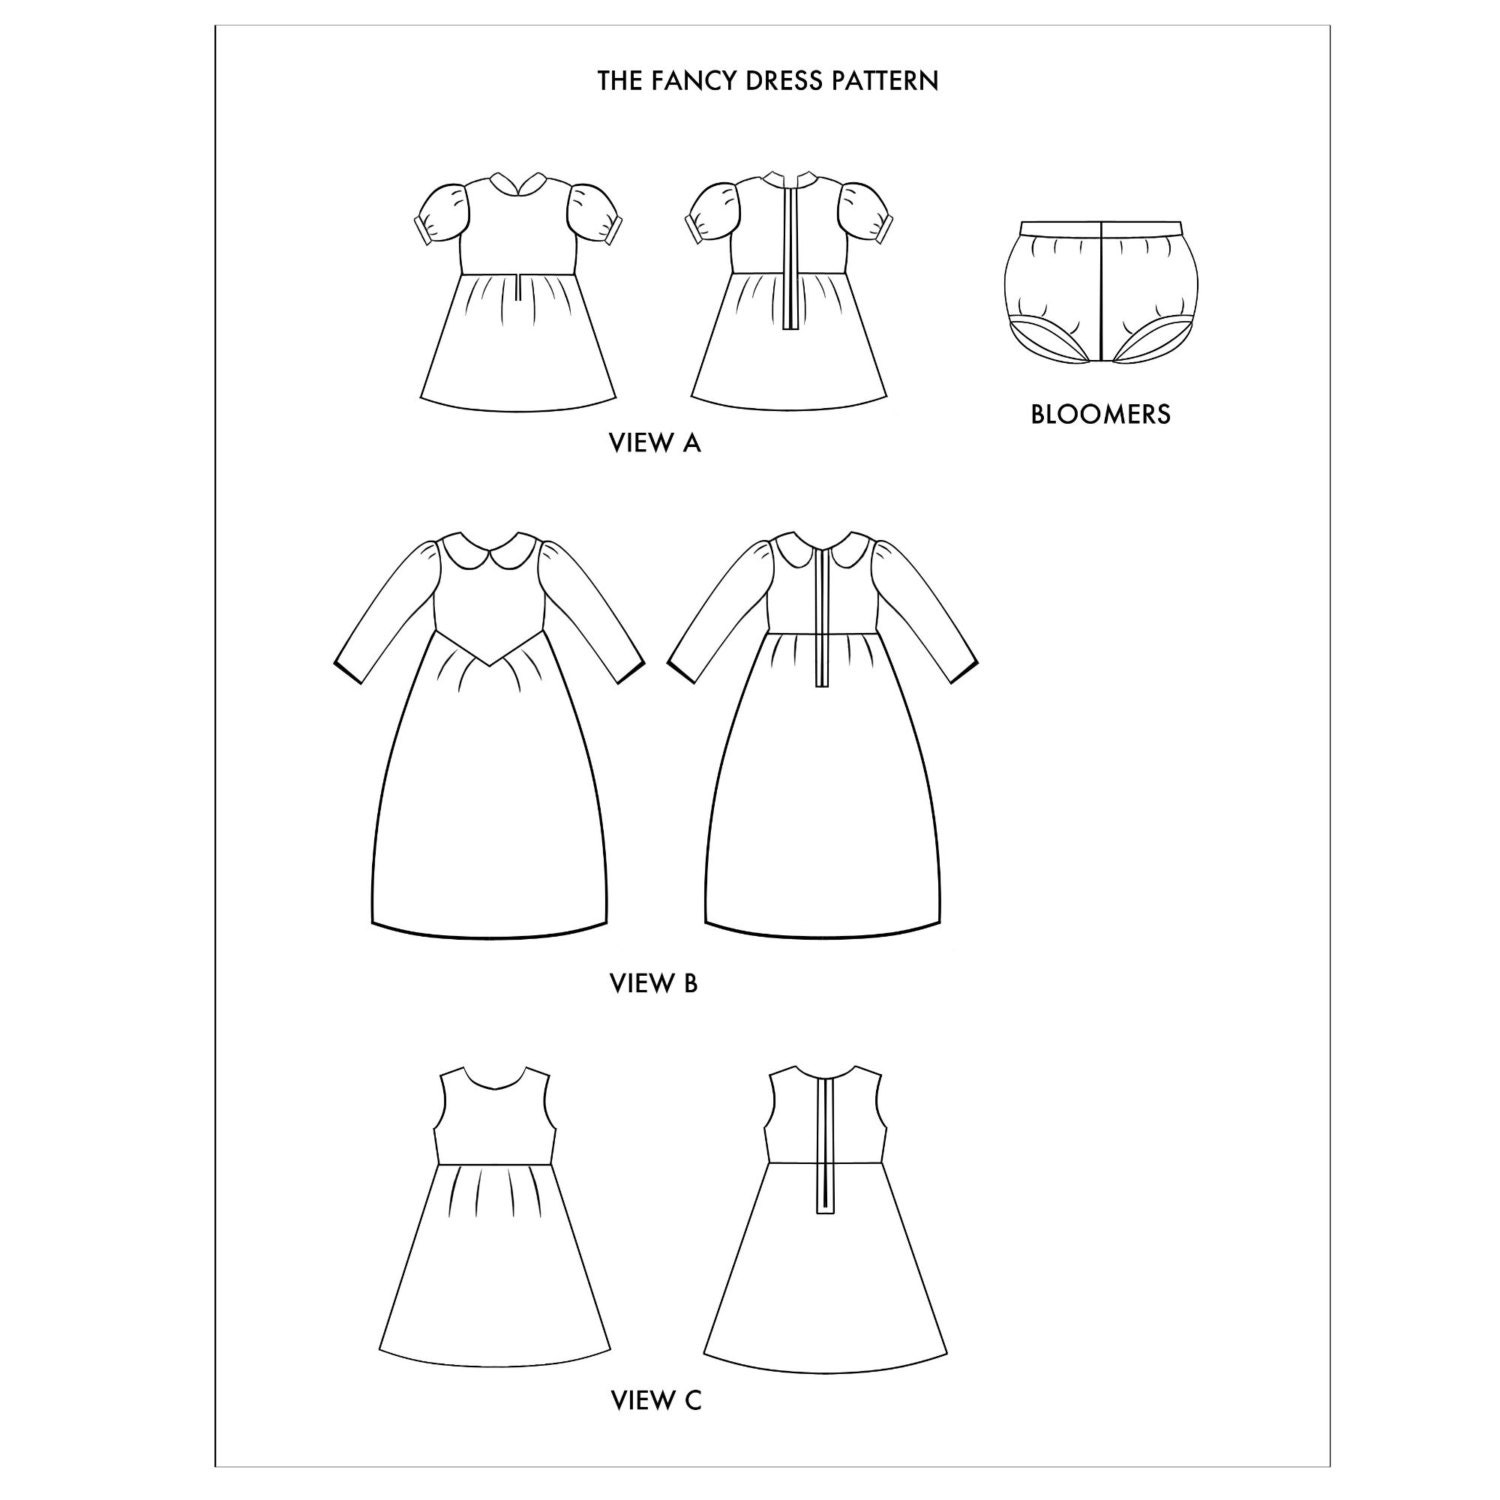 PDF Costume Pattern The Fancy Dress and Bloomers Costume PDF | Etsy